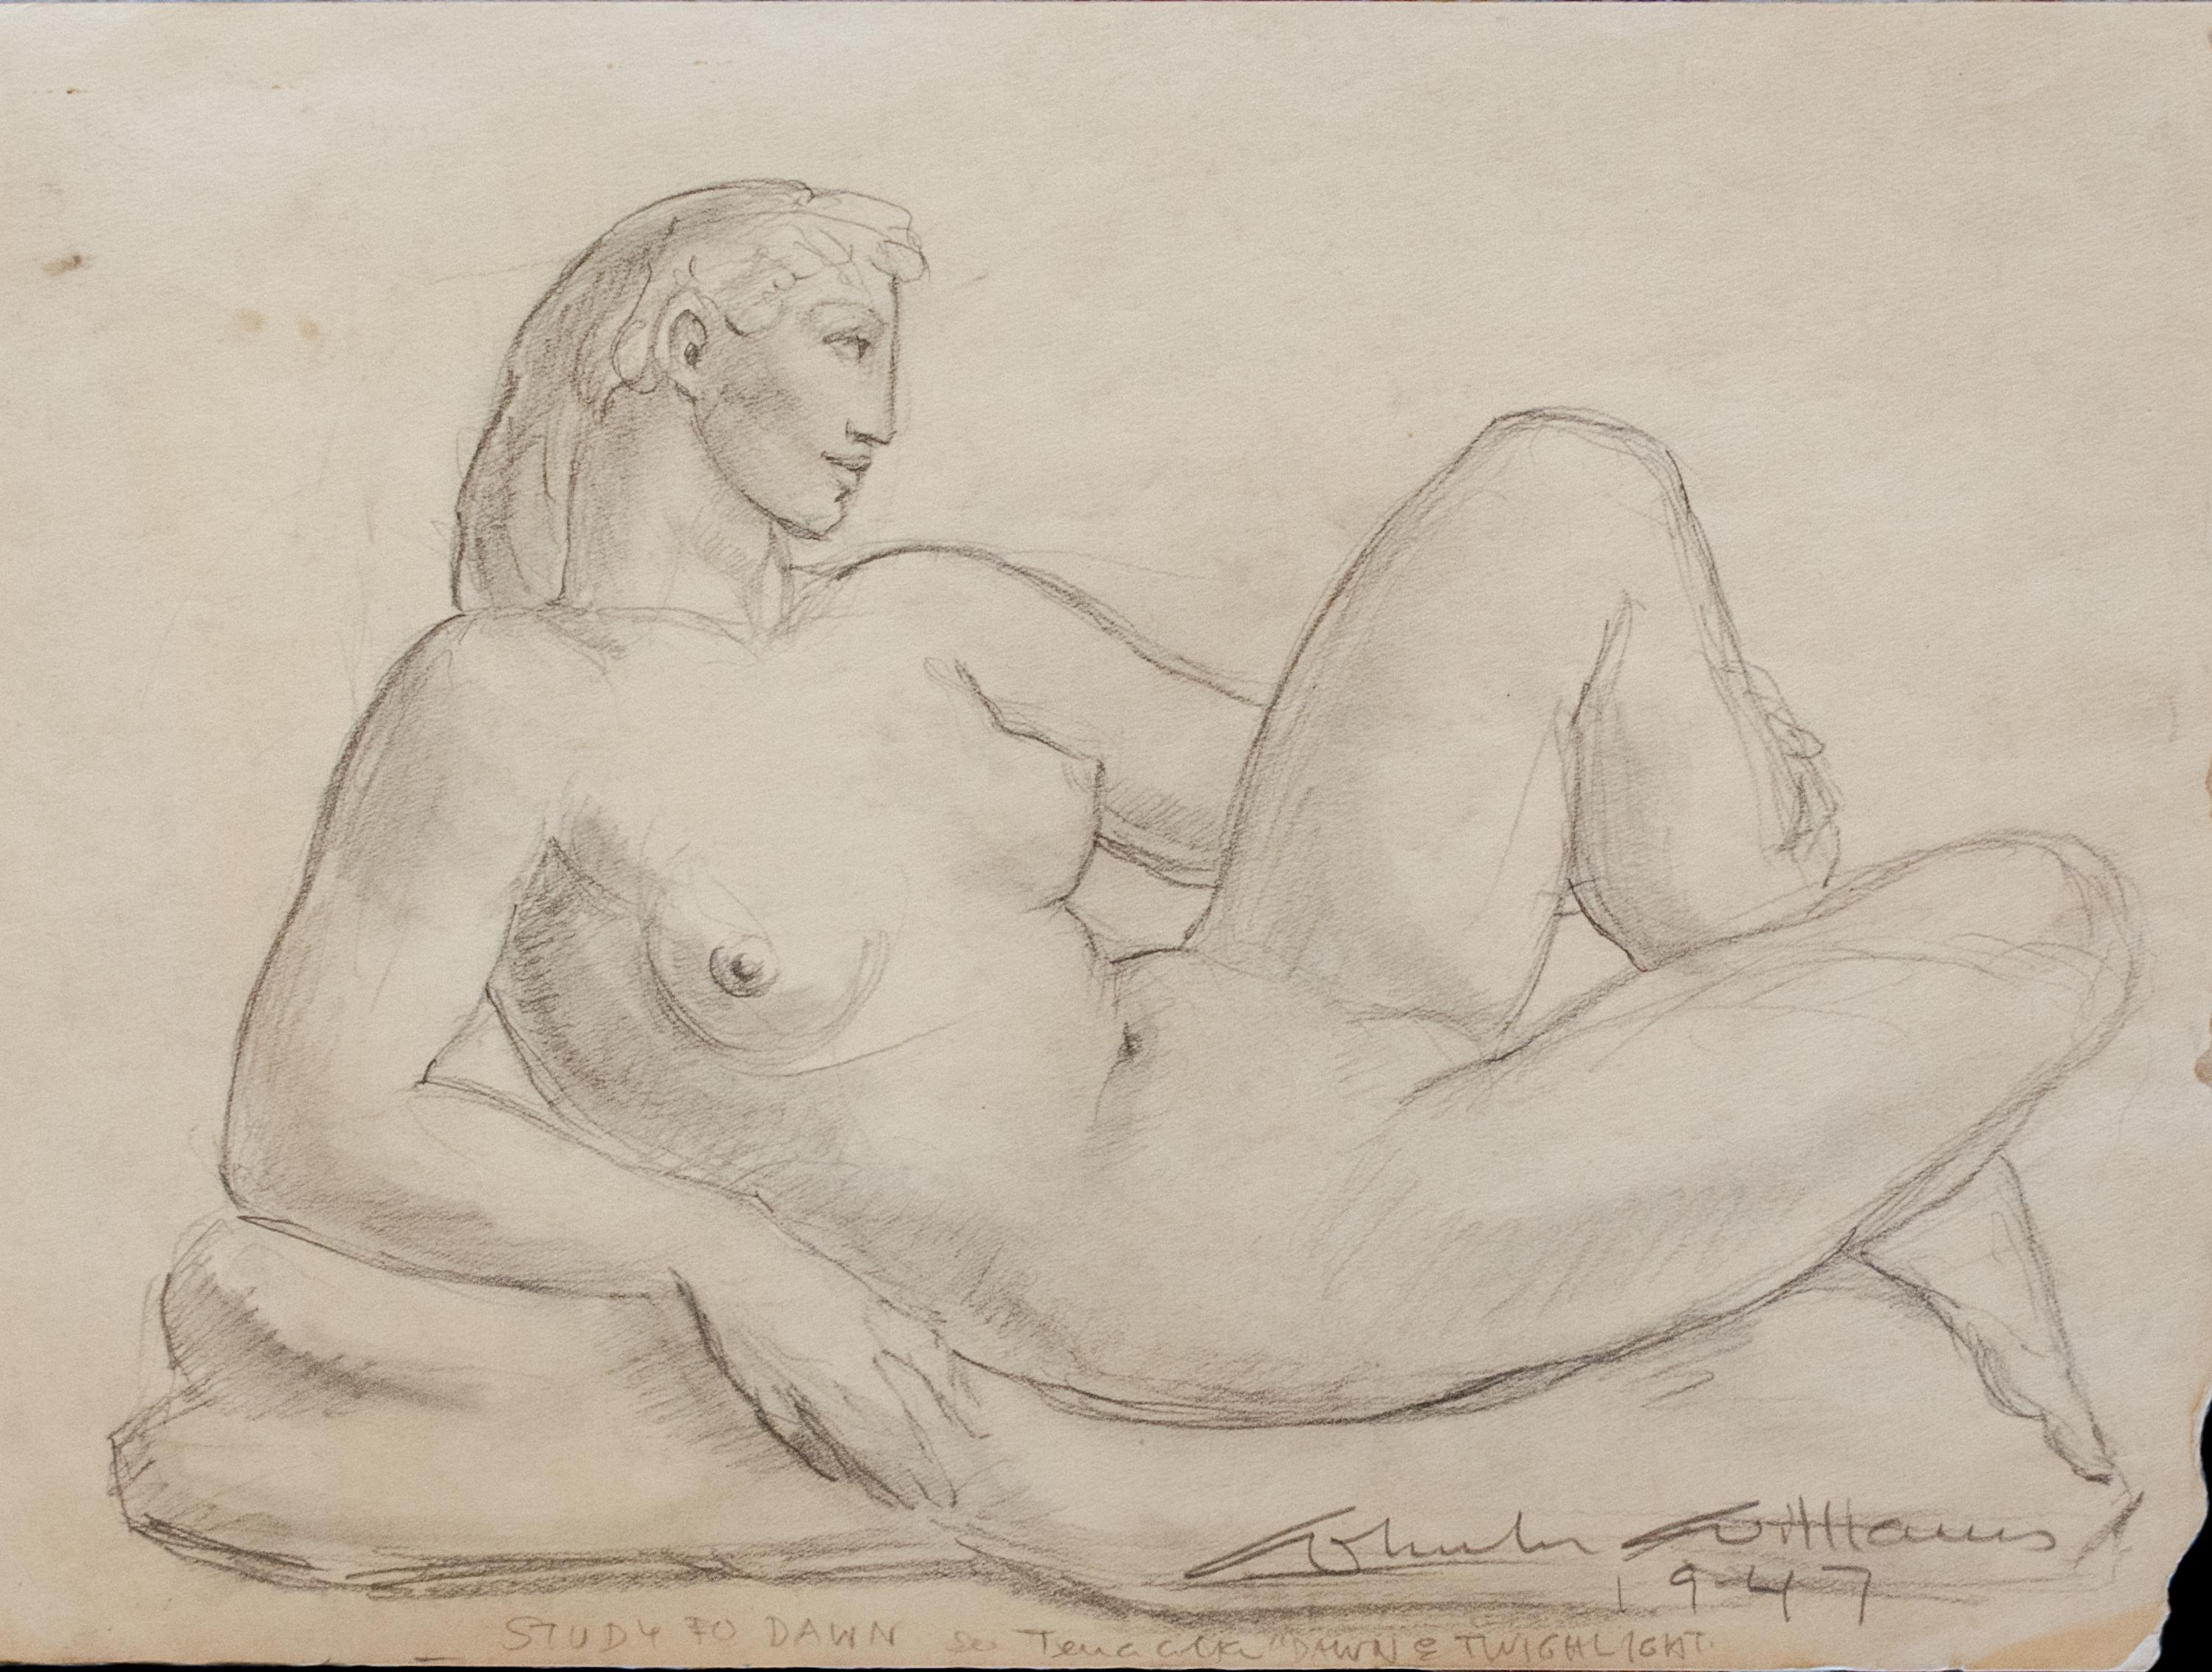 Wheeler Williams (American, 1897-1972)
Study for Dawn, 1947
Pencil on paper
9 1/4 x 12 1/4 in. 
Signed lower right: Wheeler Williams, 1947
Inscribed: Study fo Dawn [illegible] "Dawn & Twilight"

A native of Chicago, Wheeler Williams is known for his